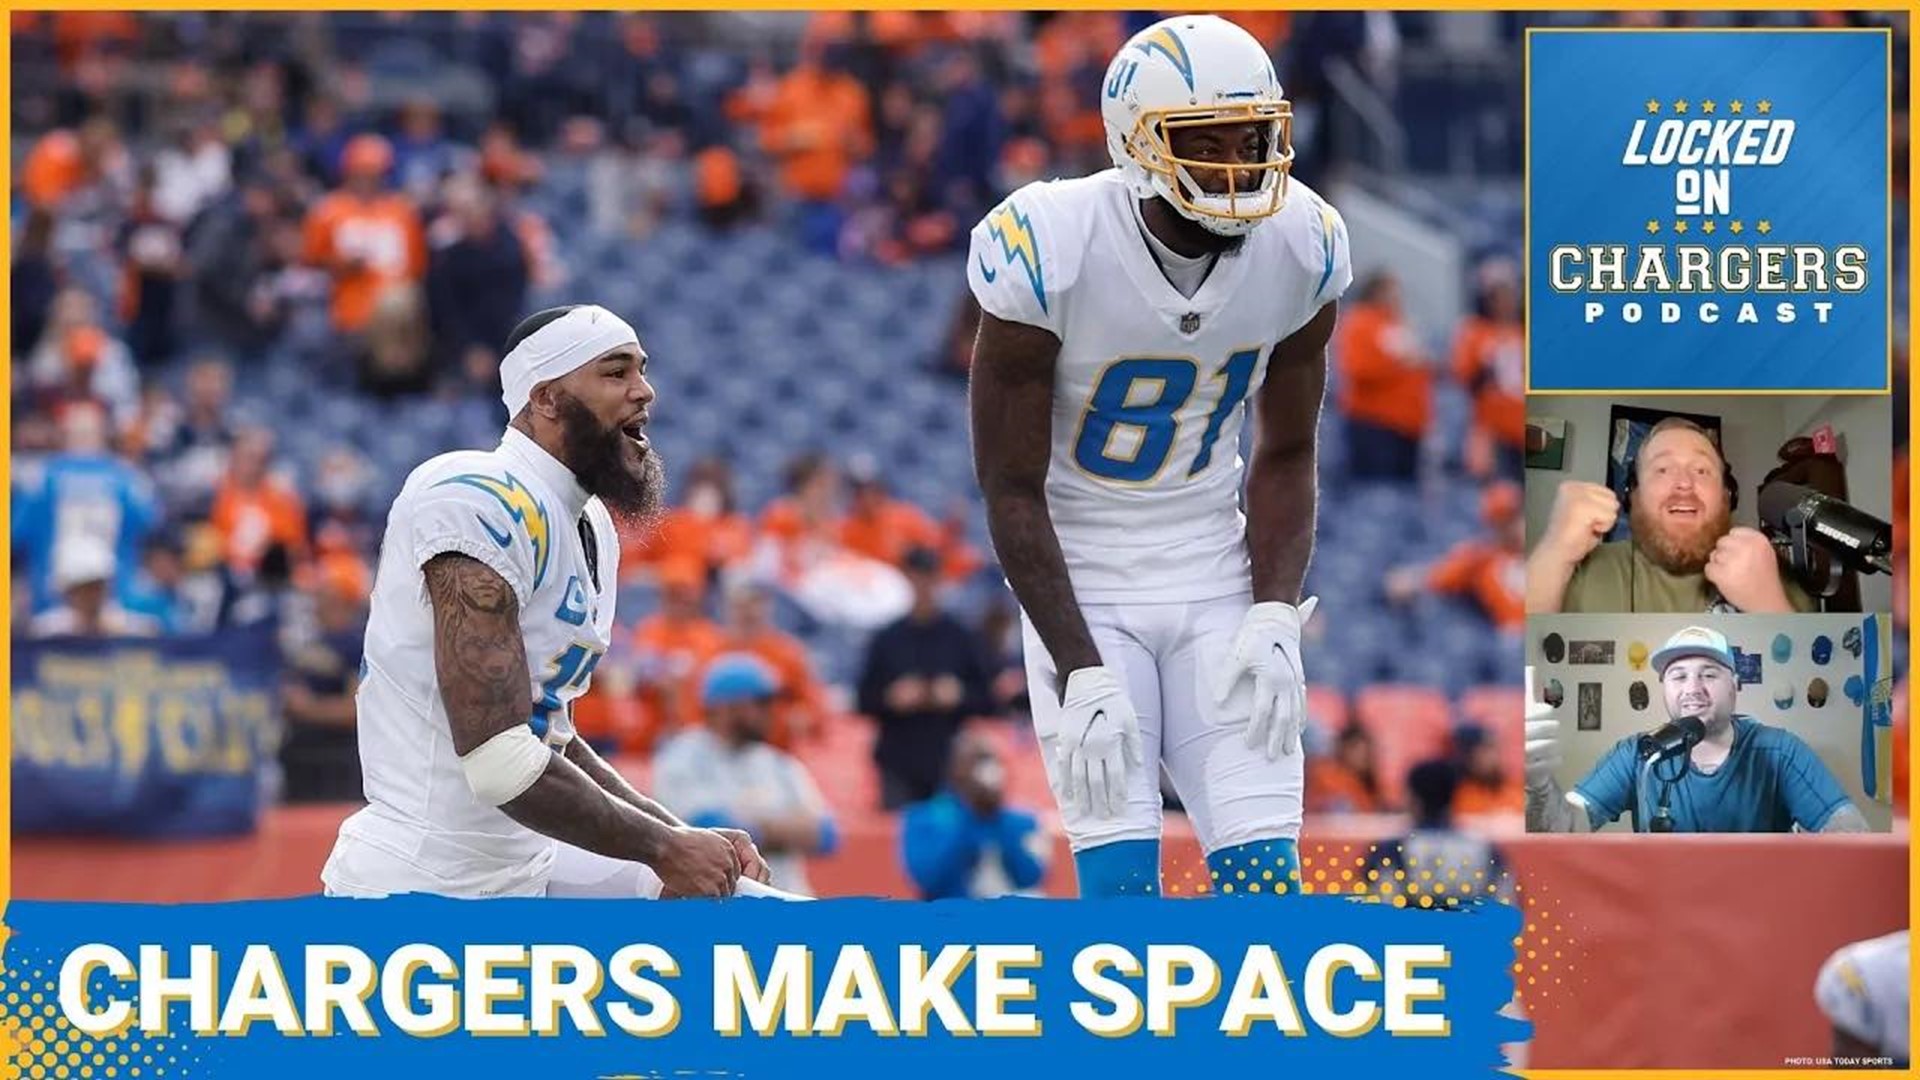 The Los Angeles Chargers found a way to get under the NFL salary cap while finding a way to keep their stars like Keenan Allen and Joey Bosa.